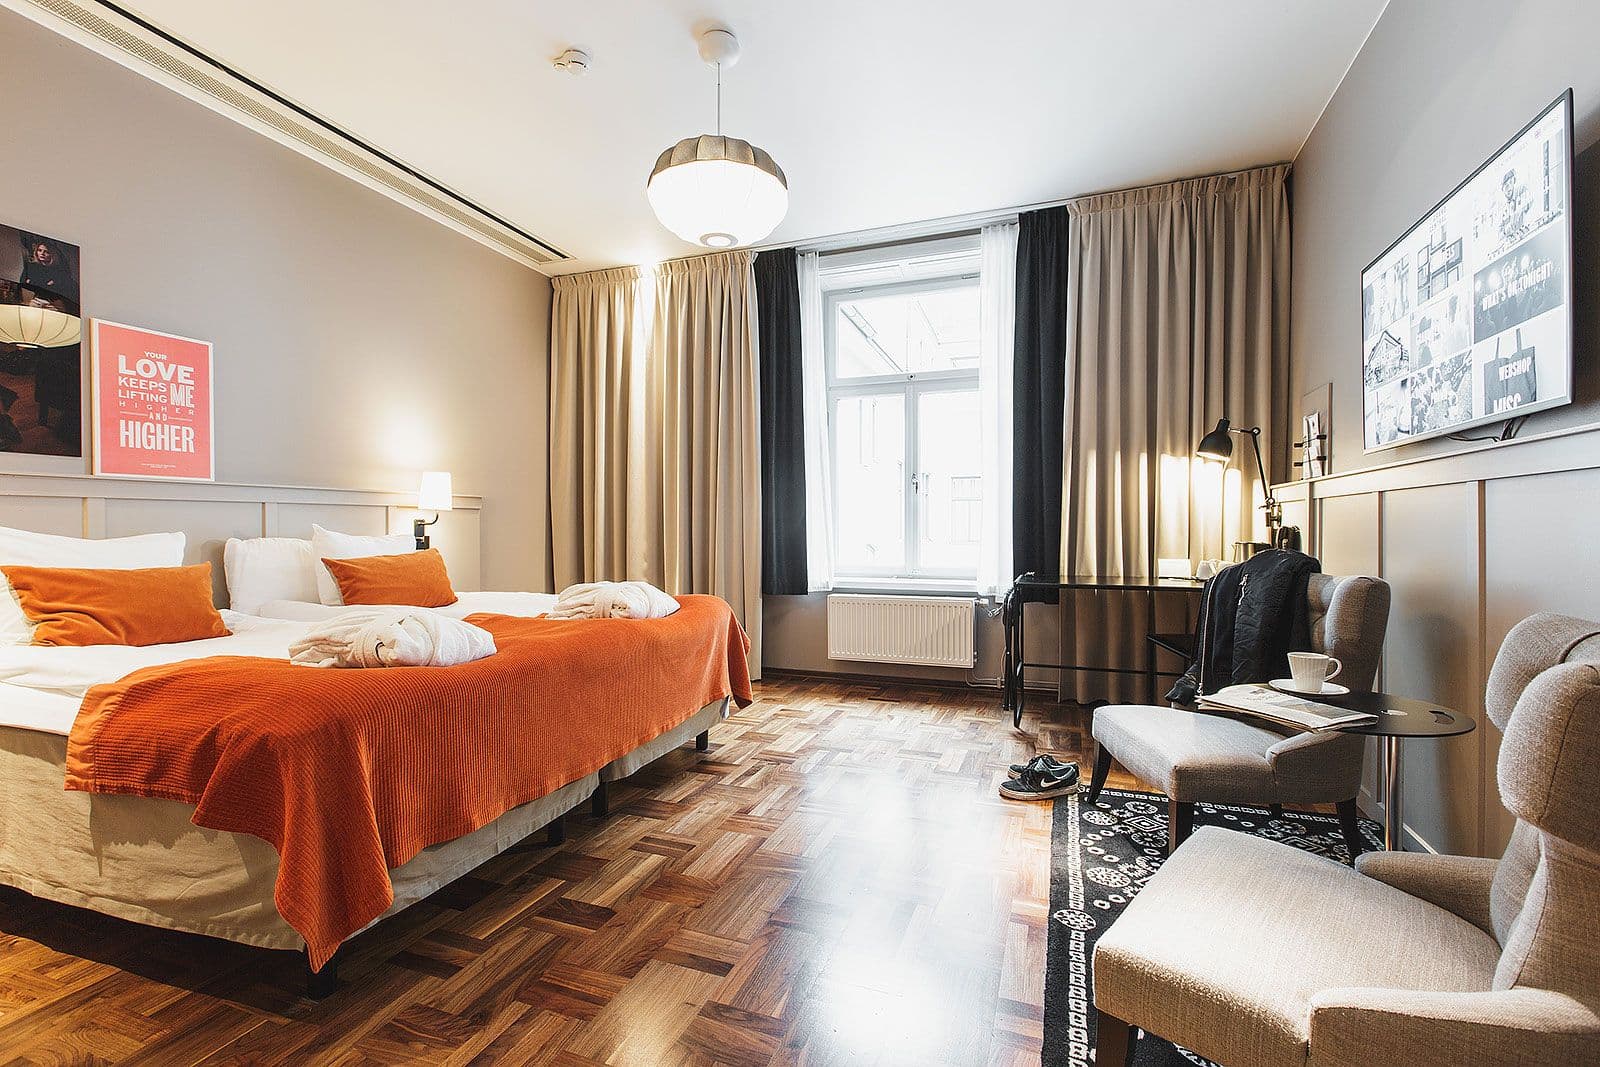 The guide to business hotels in Stockholm